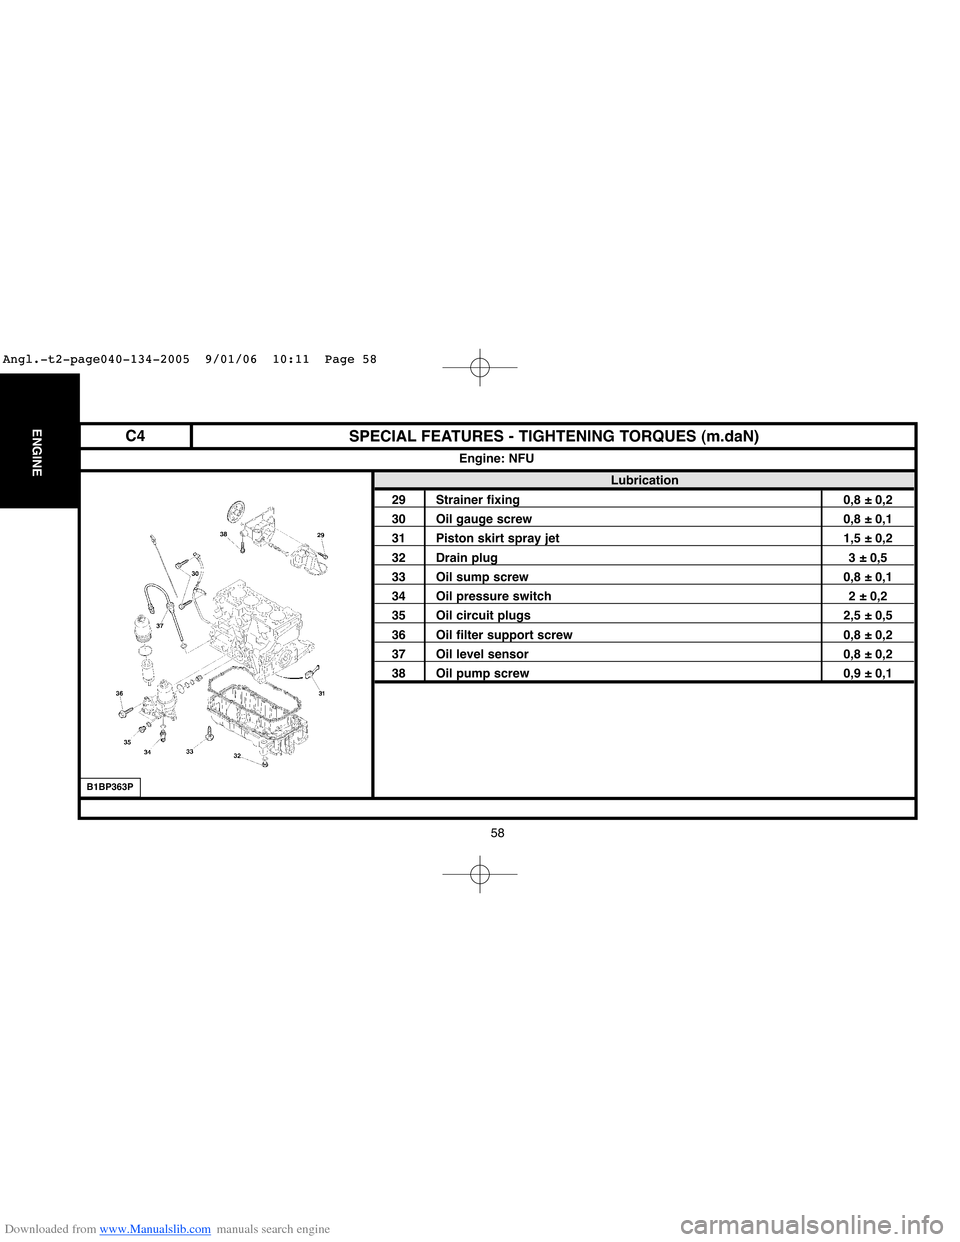 Citroen C4 2005 2.G Workshop Manual Downloaded from www.Manualslib.com manuals search engine 58
ENGINESPECIAL FEATURES - TIGHTENING TORQUES (m.daN)
Lubrication
29 Strainer fixing 0,8 ± 0,2
30 Oil gauge screw 0,8 ± 0,1
31 Piston skirt 